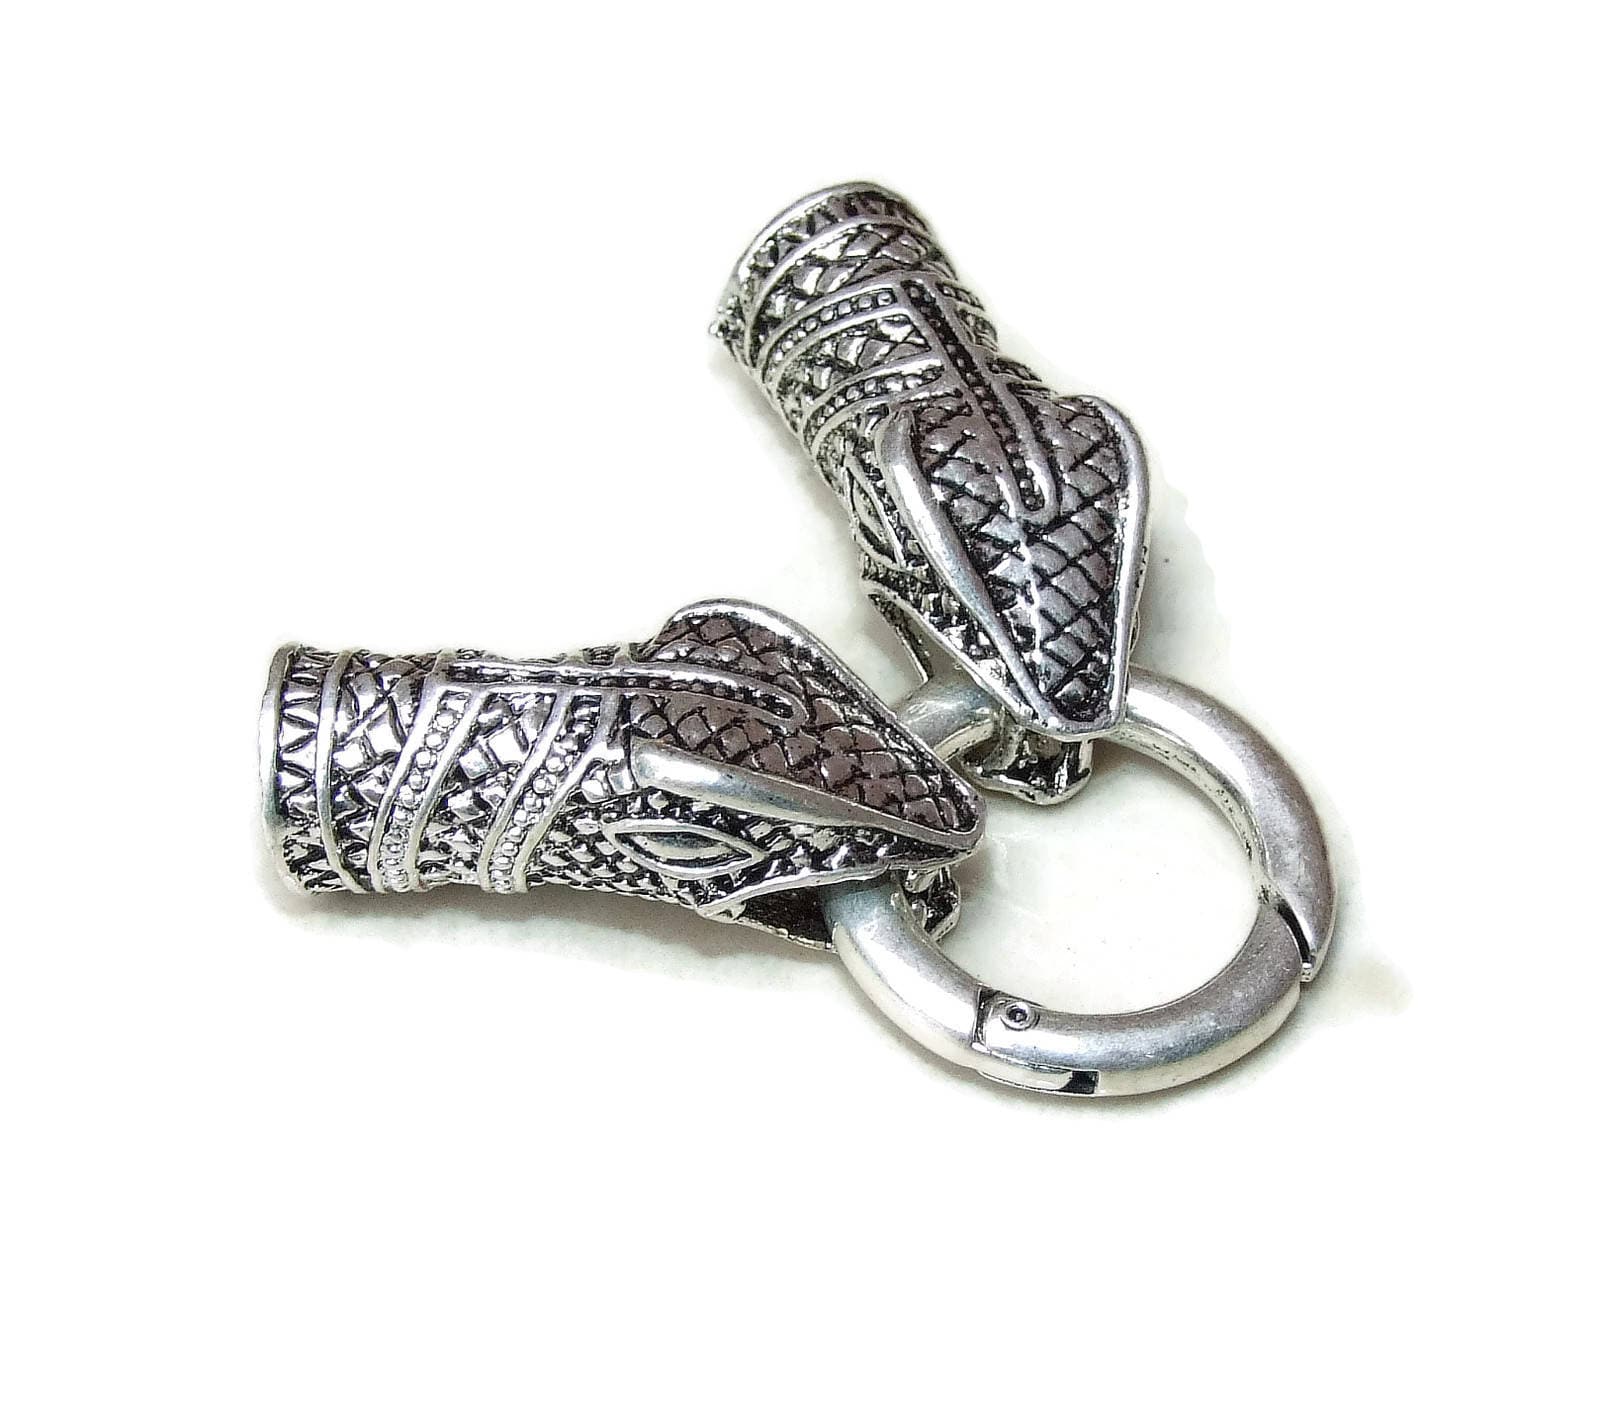 Snake Head Cord End Cap Clasp Lock Ring - Silver Tone - Dragon Head - Necklace Bracelet Clasp - Leather Cord End - Alloy - 11mm x 33mm